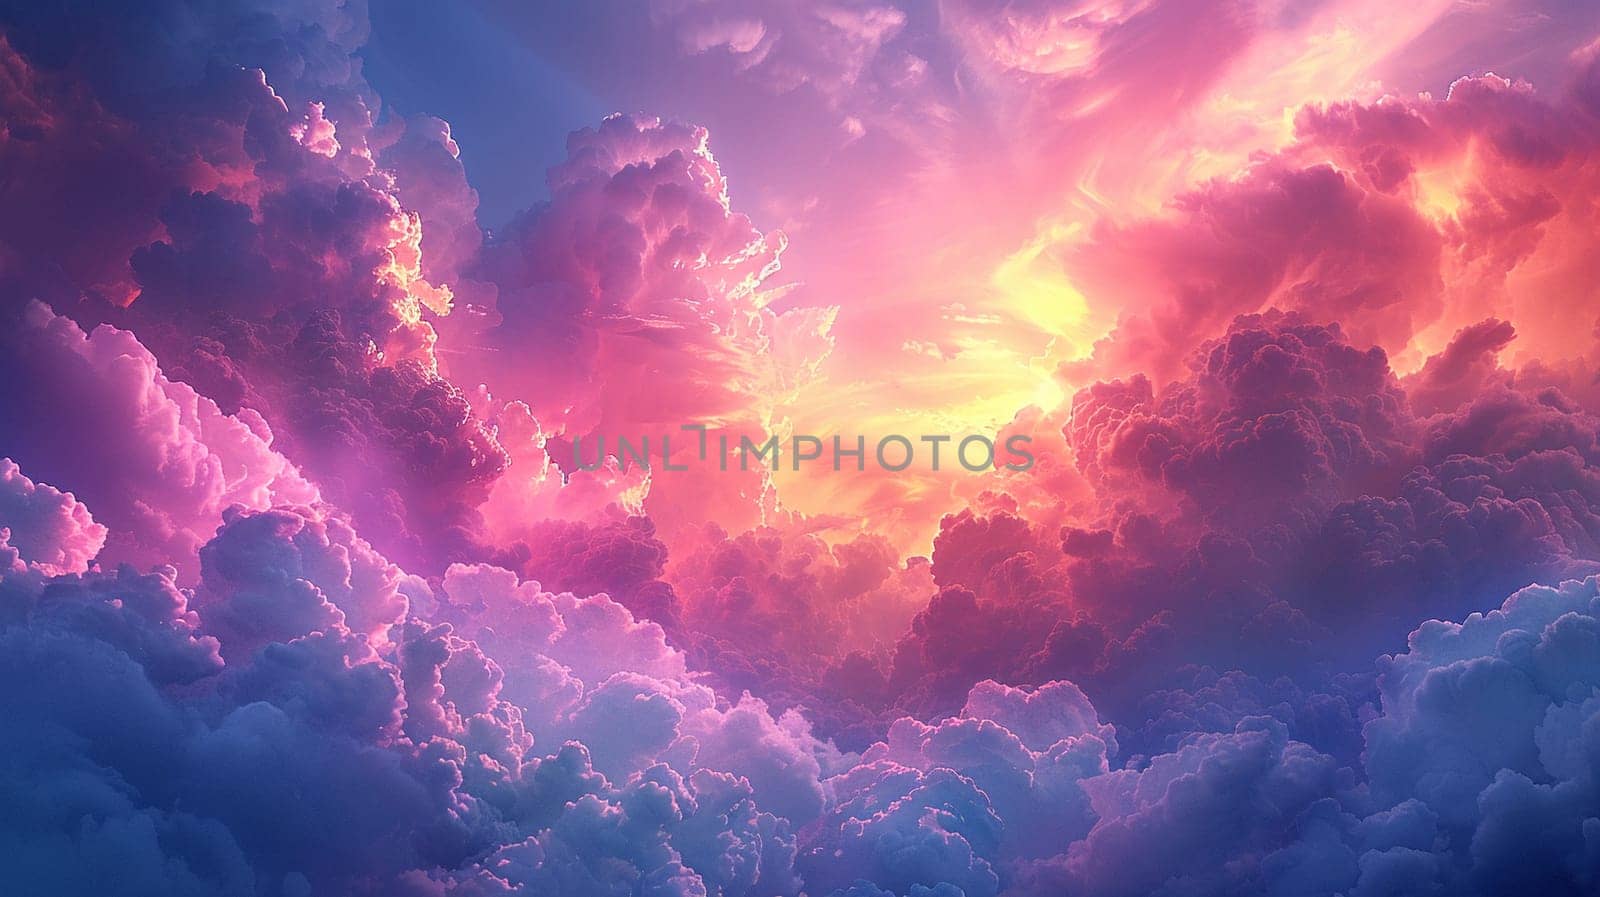 Cloudy sky at sunset with vibrant colors, for dramatic and inspirational backgrounds.